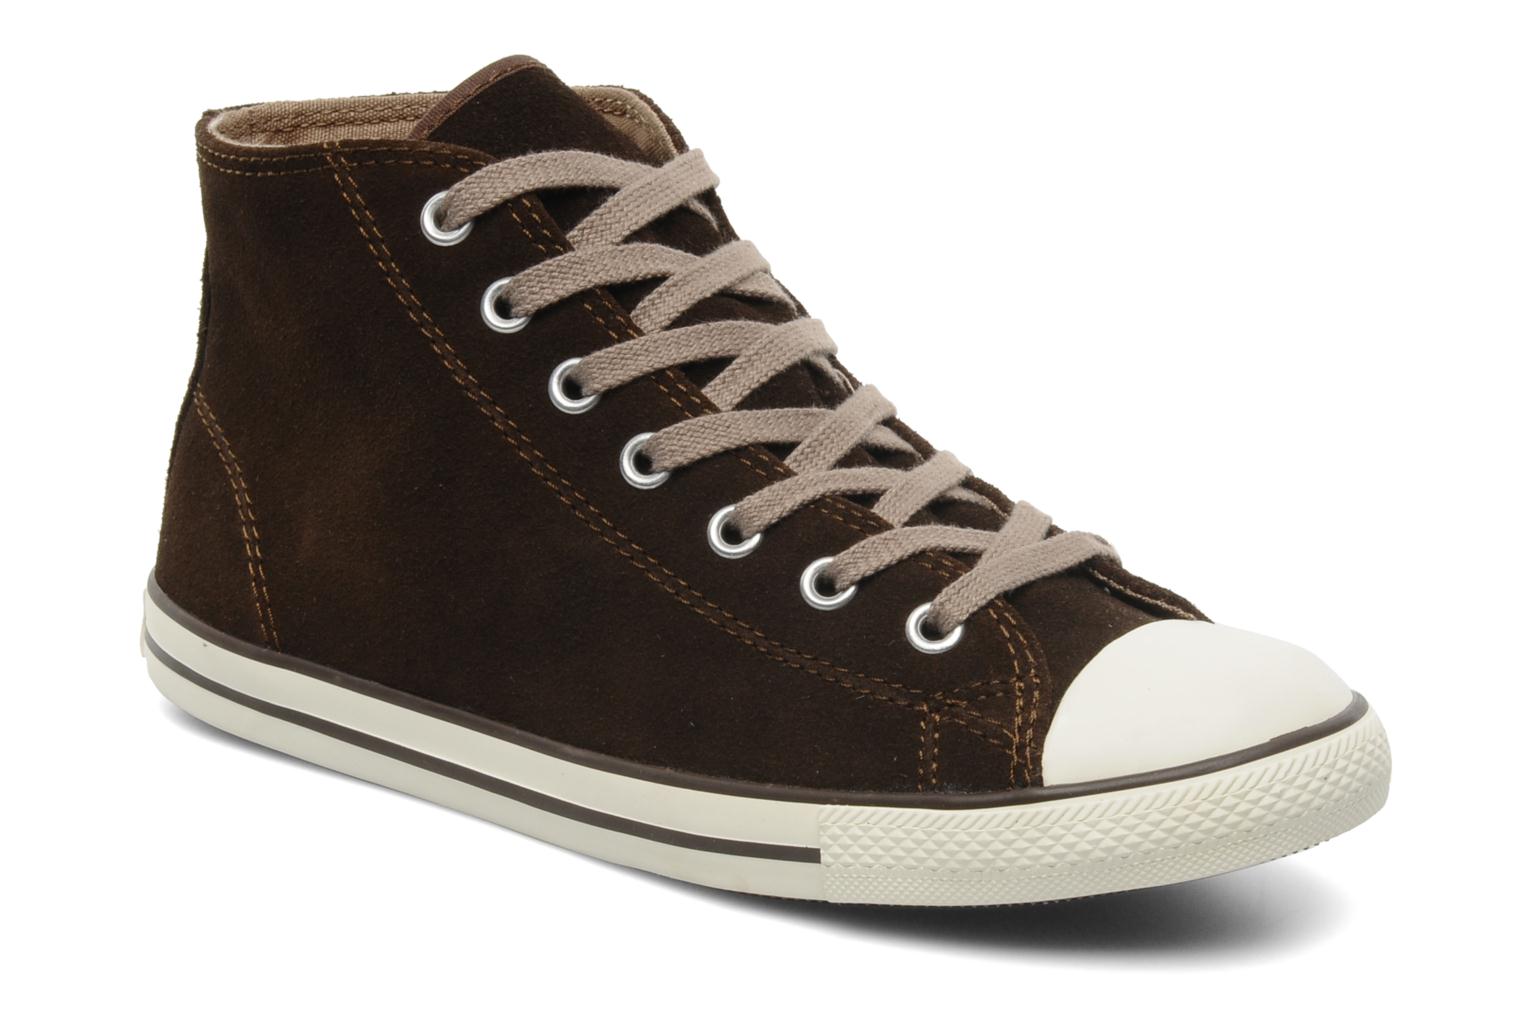 Foto Tenis moda Converse All Star Dainty Suede Mid Mujer